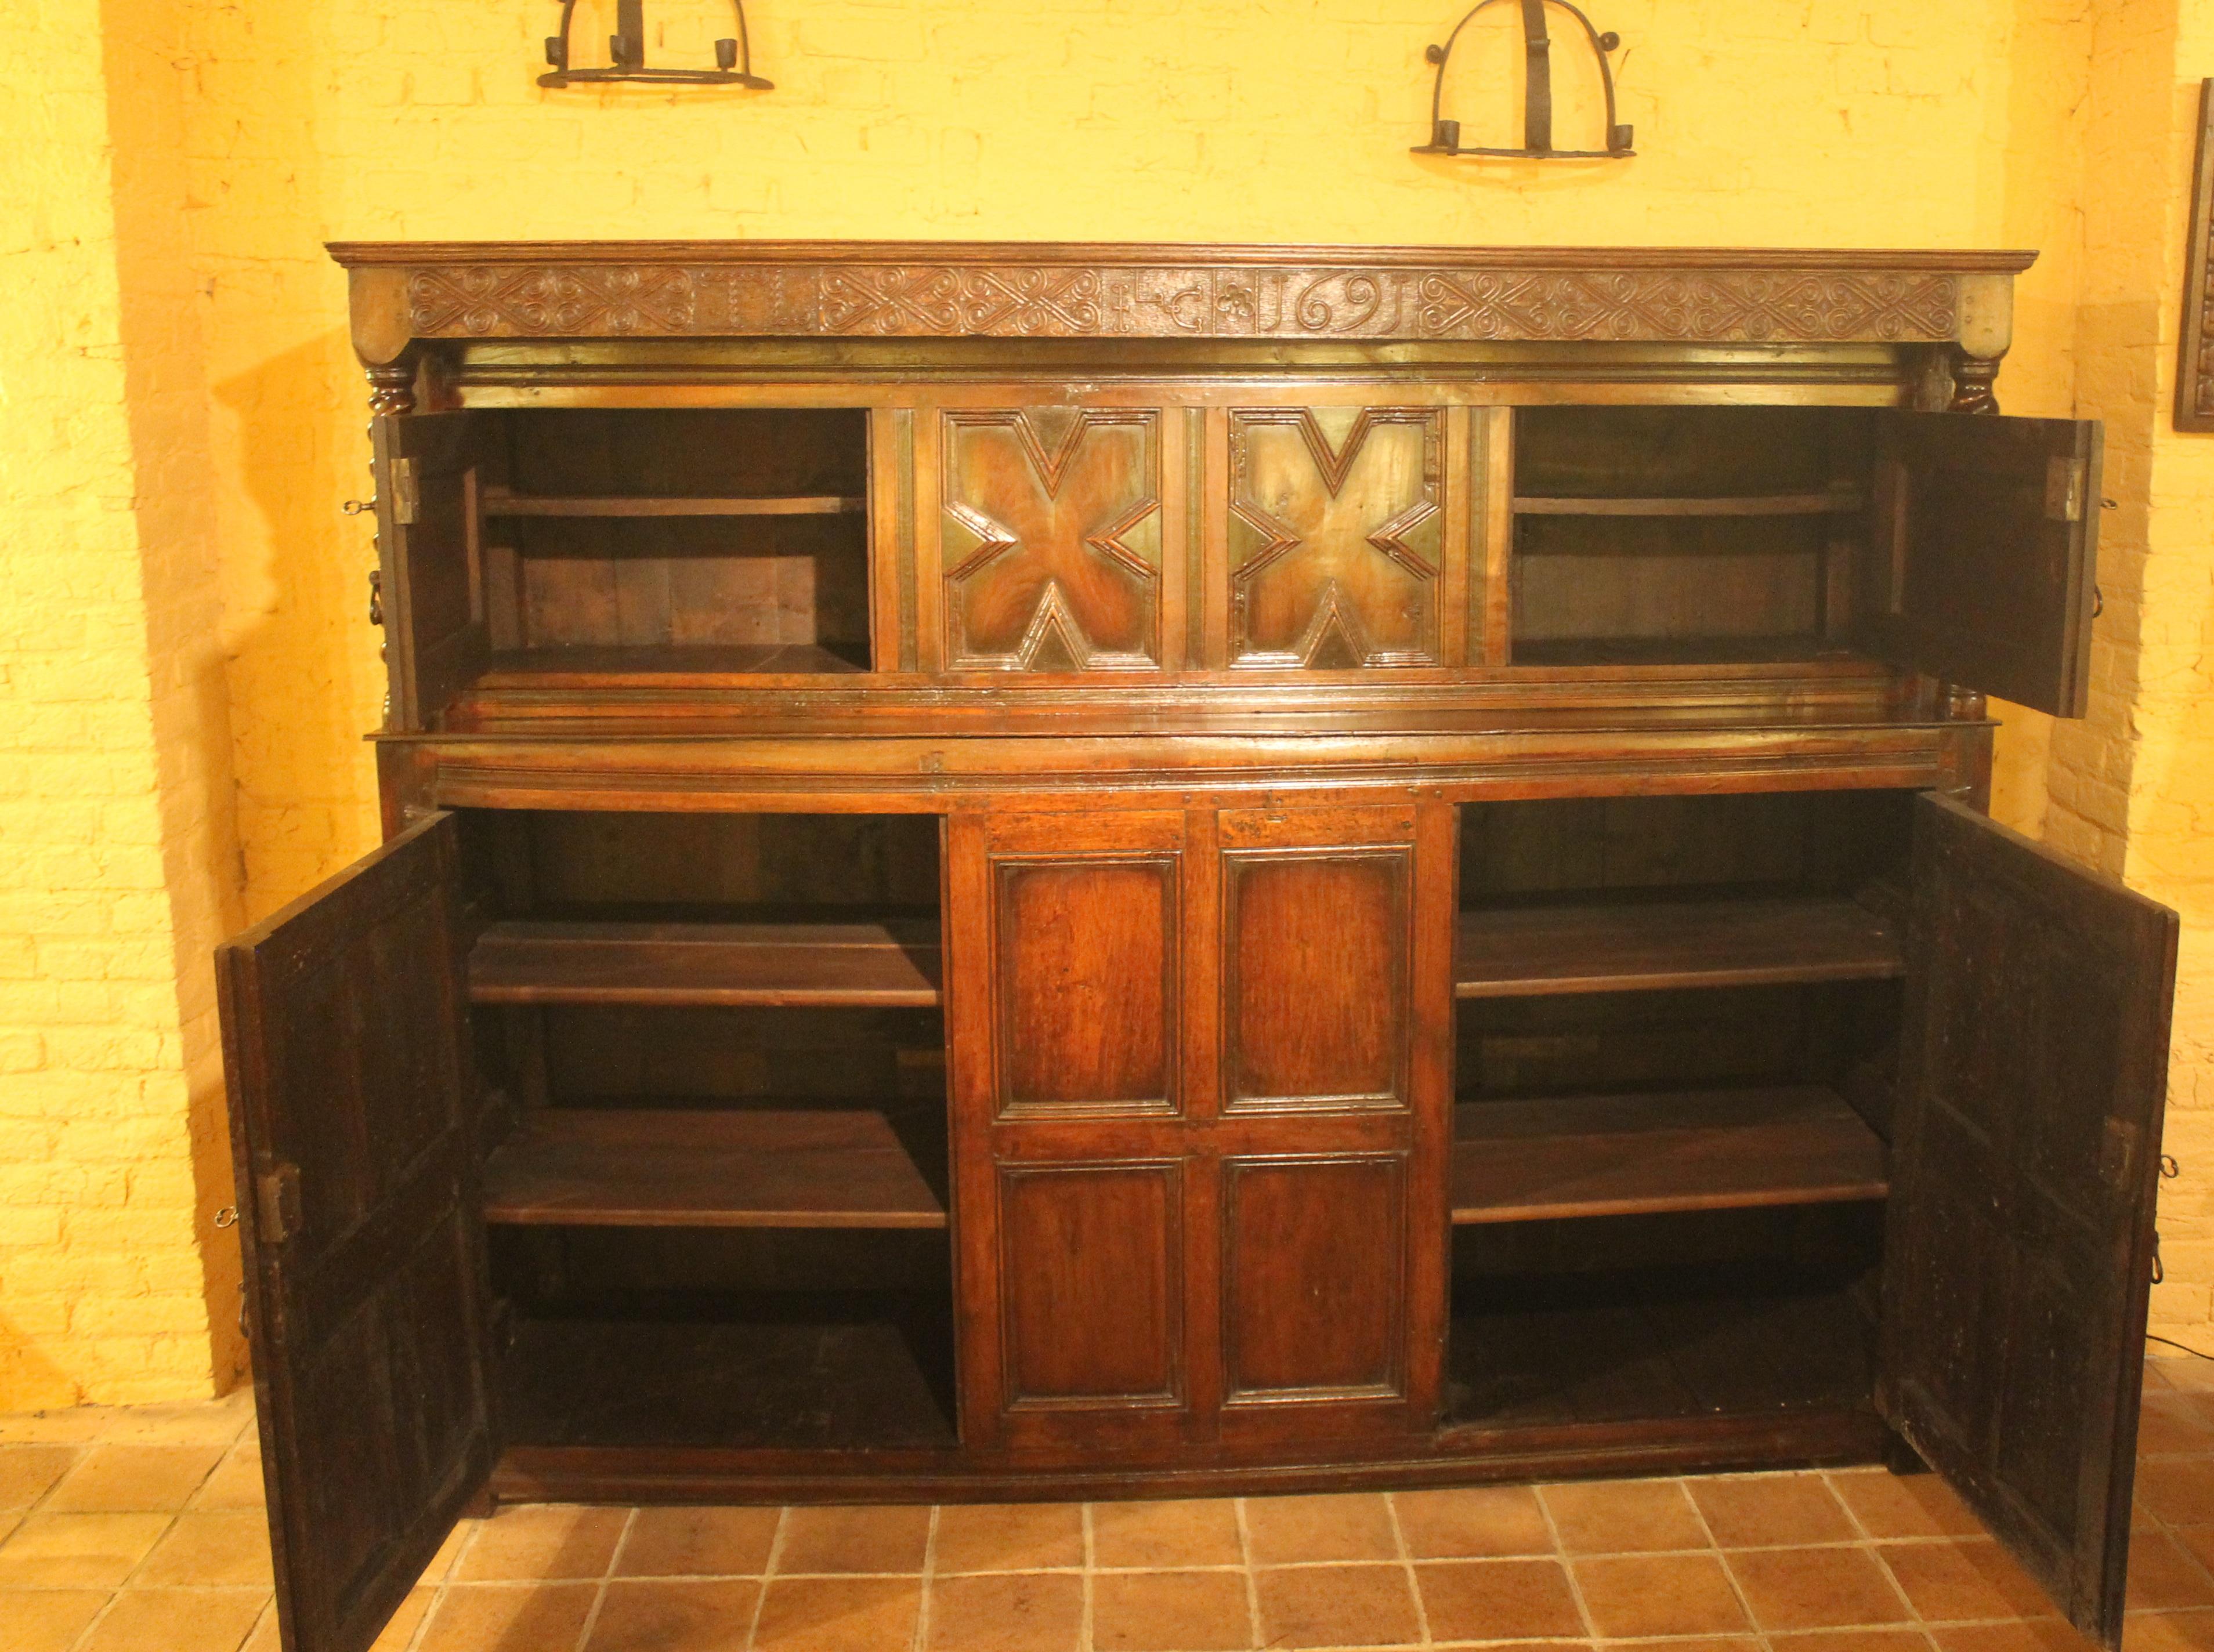 exceptional 17th century English buffet dated 1691 in oak from Scotland
Rare sideboard James II period with very beautiful original irons 
This piece of furniture stands out by his beautiful geometric shapes that give him a lot of character and